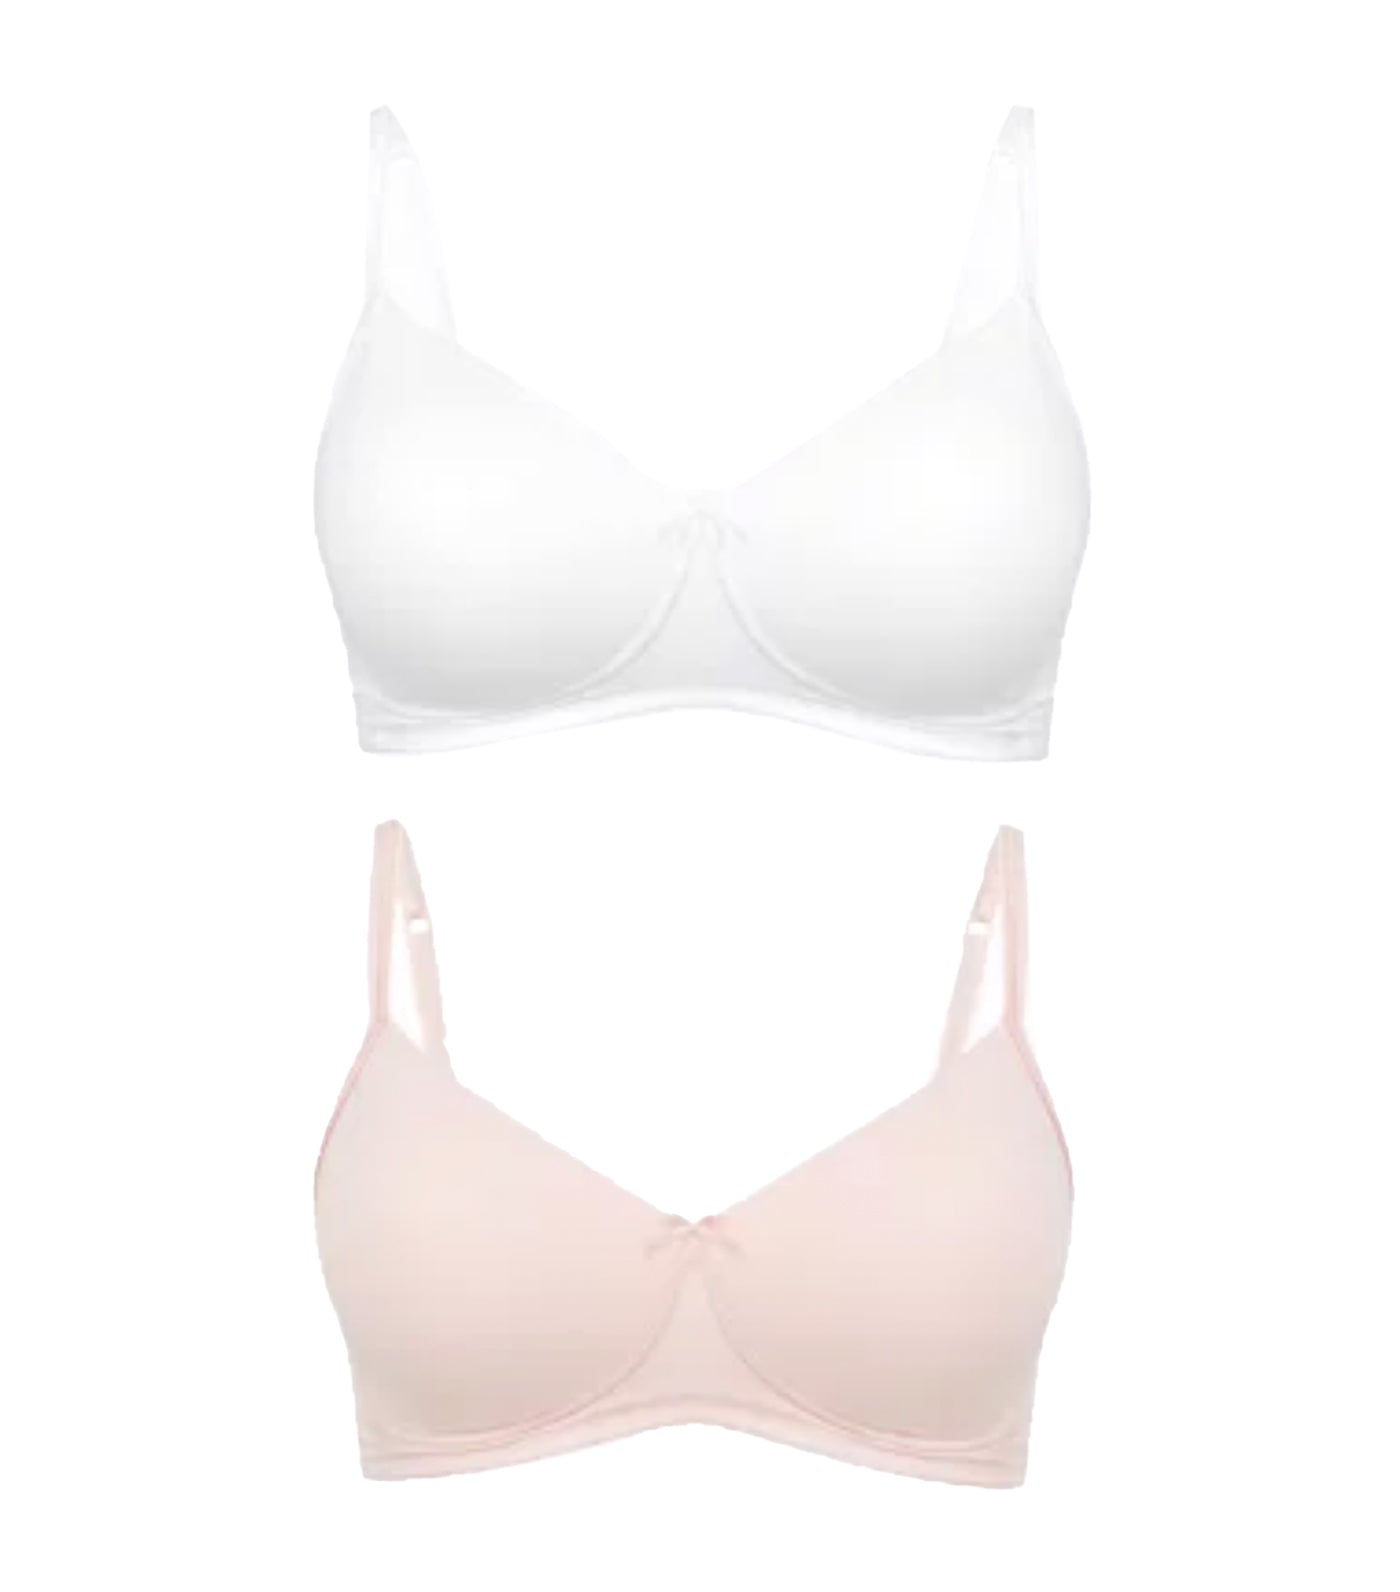 marks and spencer 2 pack cotton rich padded full cup bras - white mix